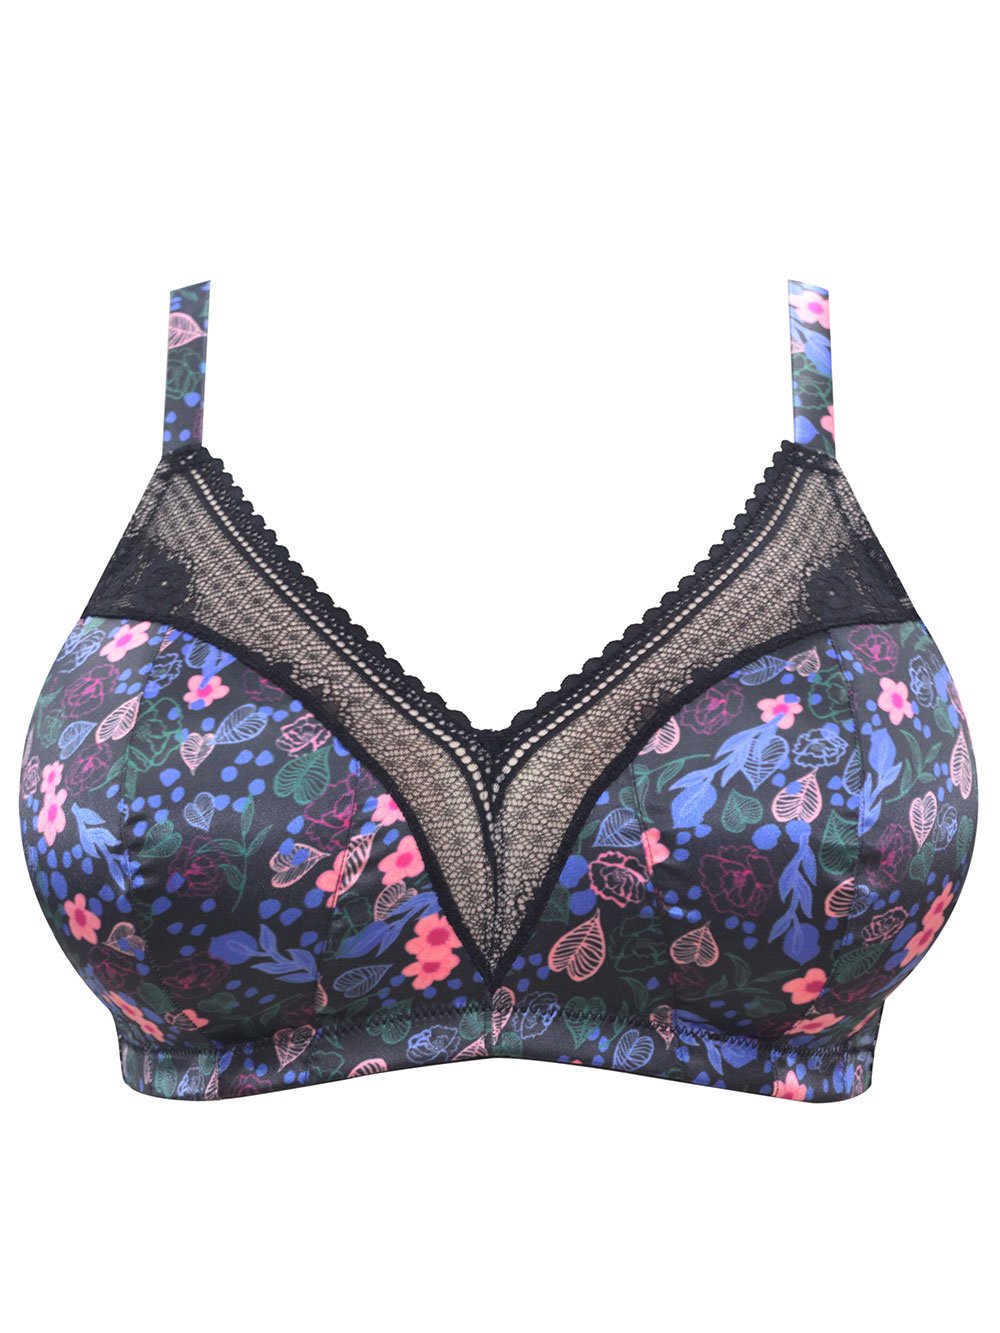 Jade Padded Bralette - Black With Floral - HauteFlair